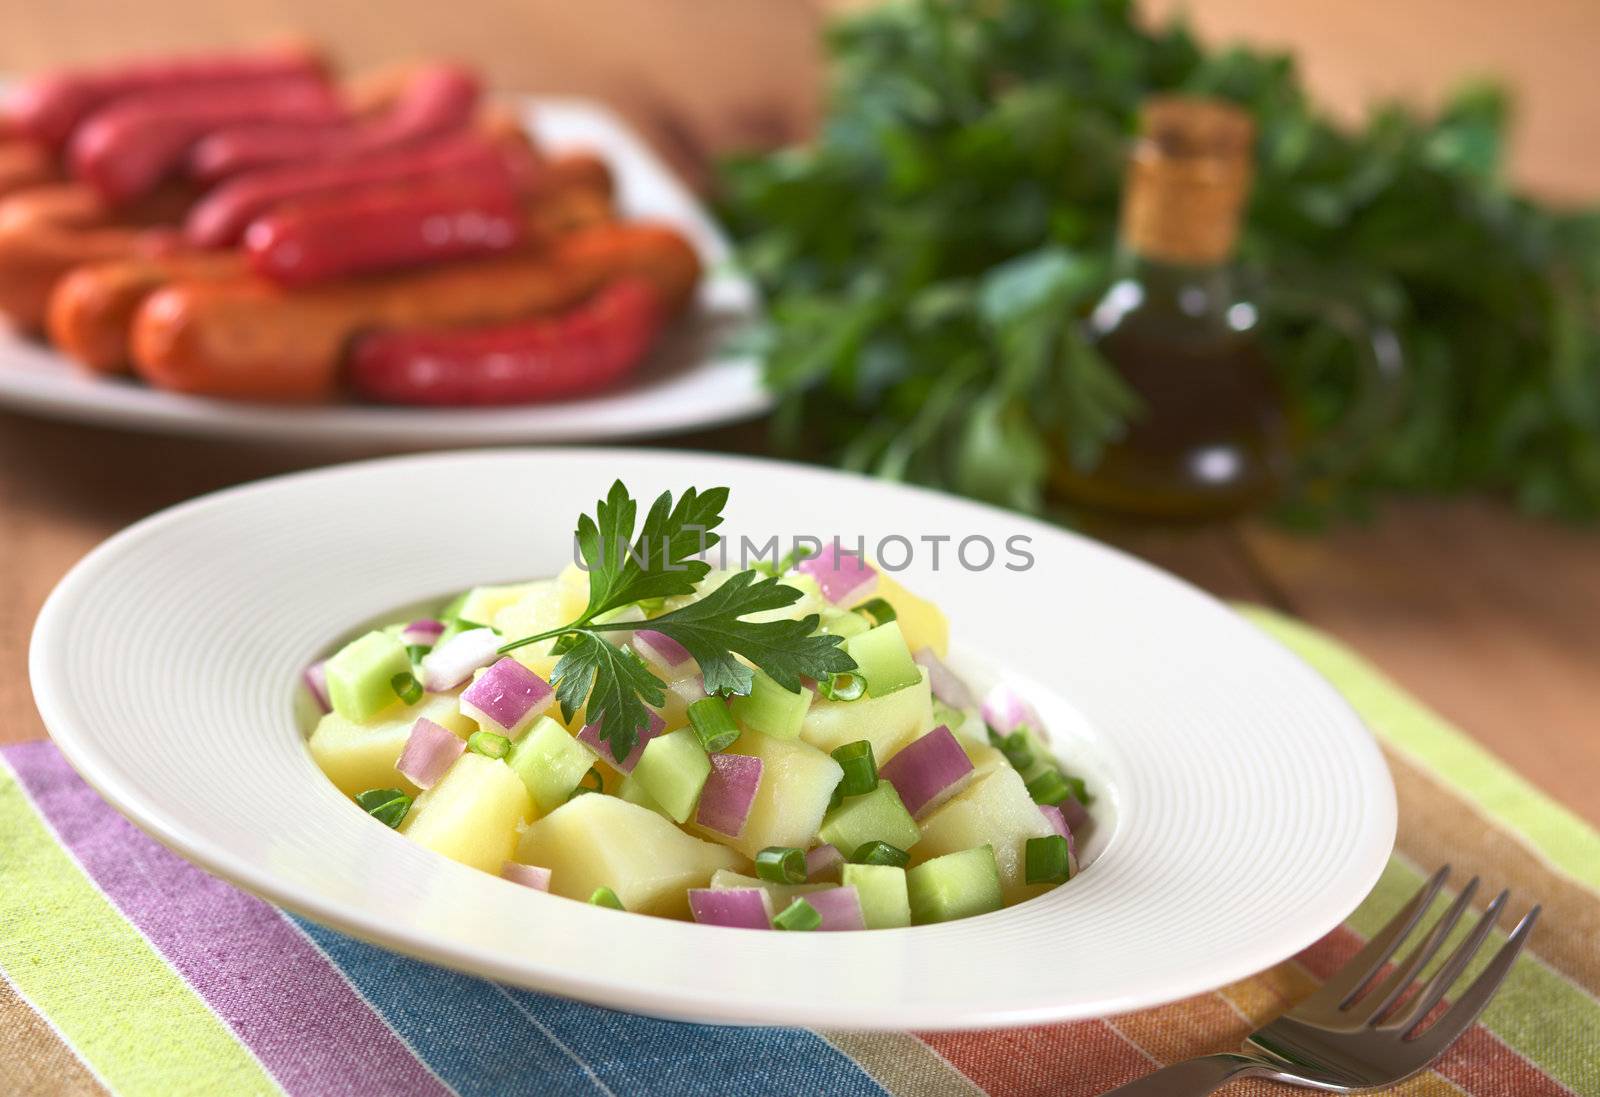 Fresh potato salad with cucumber, red and green onion made with an oil dressing with barbecued sausages, oil and parsley in the back (Selective Focus, Focus on the parsley leaf on the salad and its surroundings)